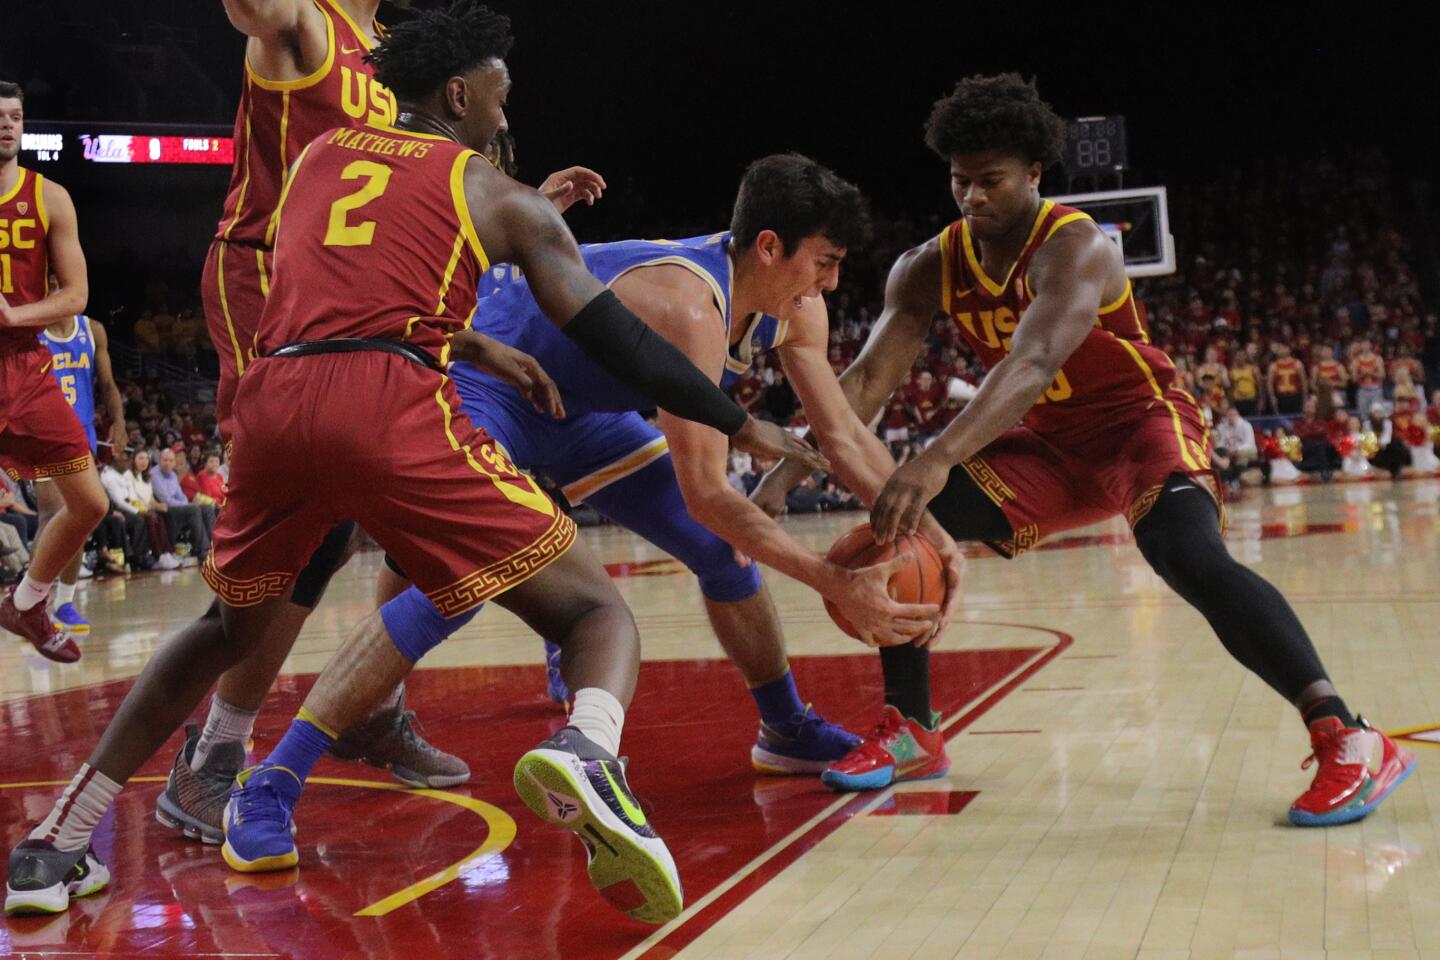 USC guards Jonah Mathews (2) and Ethan Anderson (20) try to rip the ball away from UCLA guard Jaime Jaquez Jr. during the first half of the Trojans' 54-52 victory over the Bruins at Galen Center on March 7, 2020.